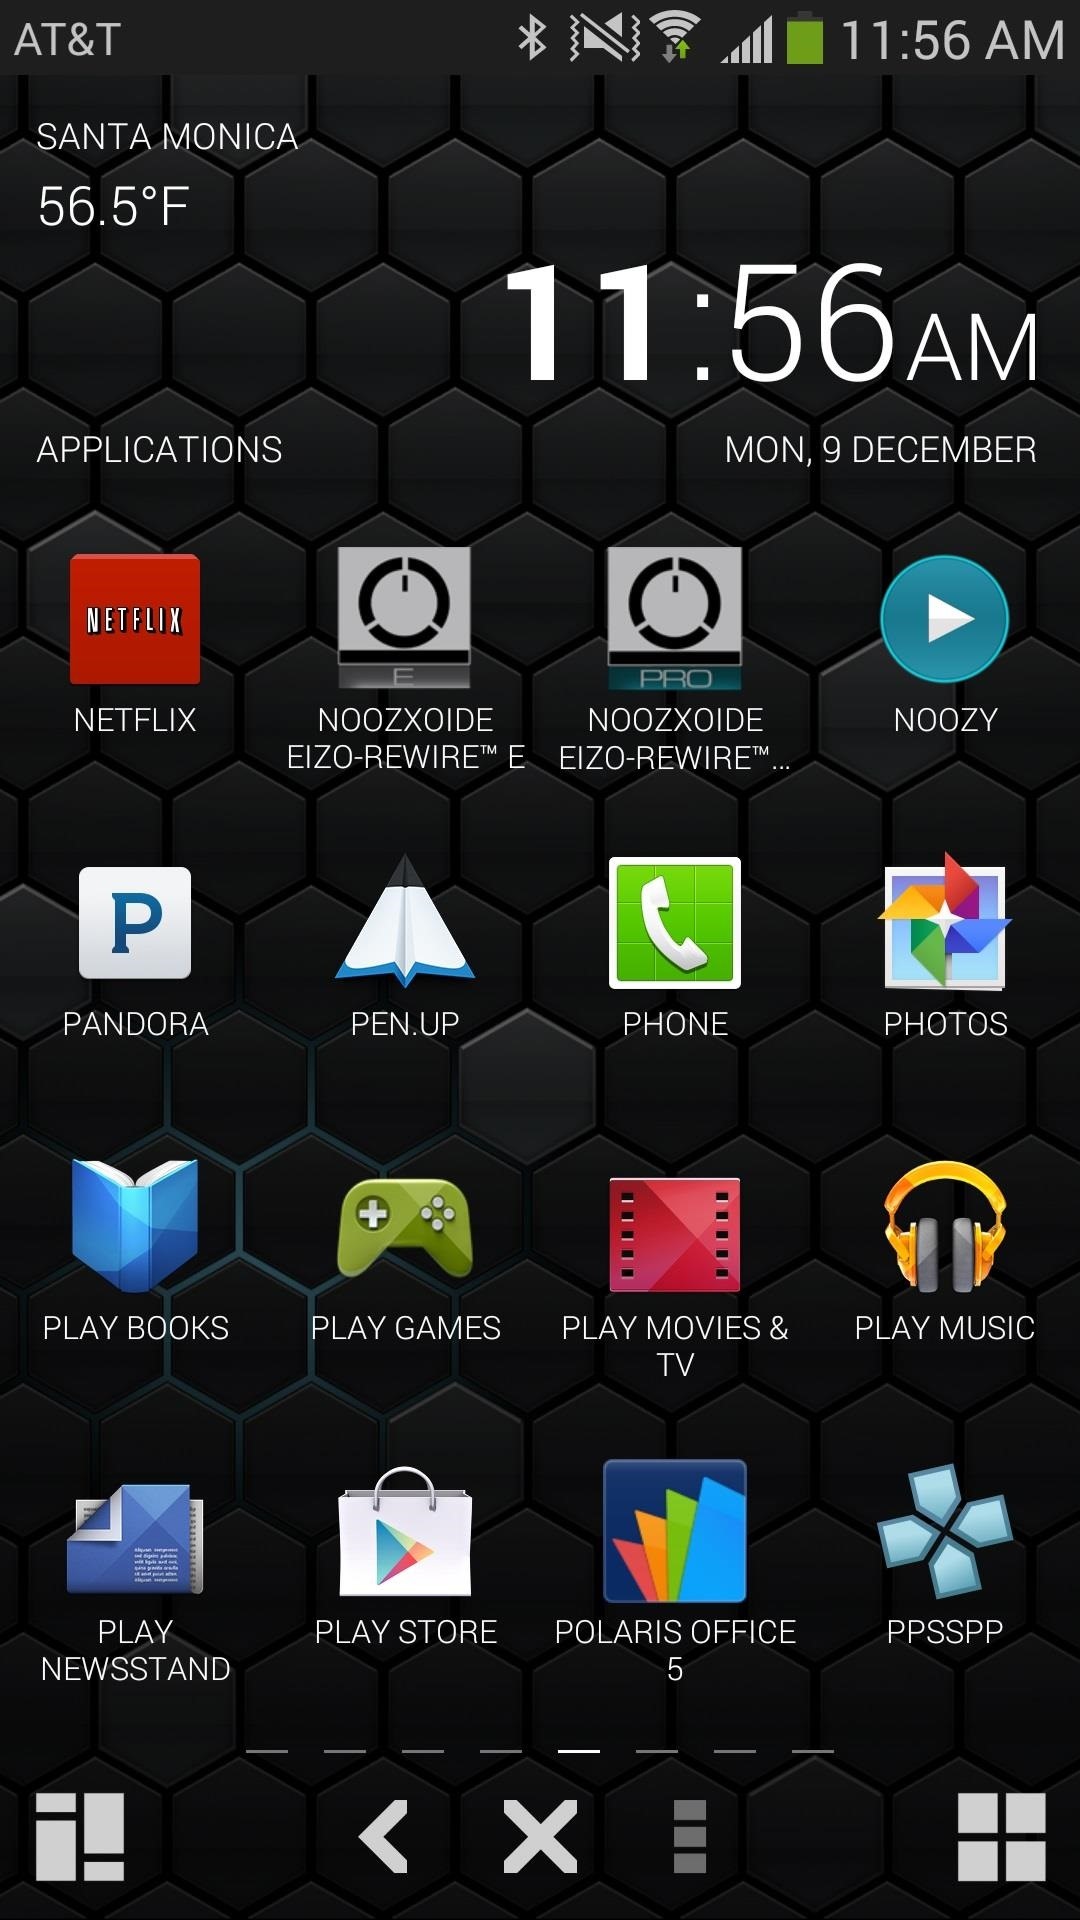 Keep Things Clean & Simple with This Minimalistic Launcher for Your Samsung Galaxy Note 3